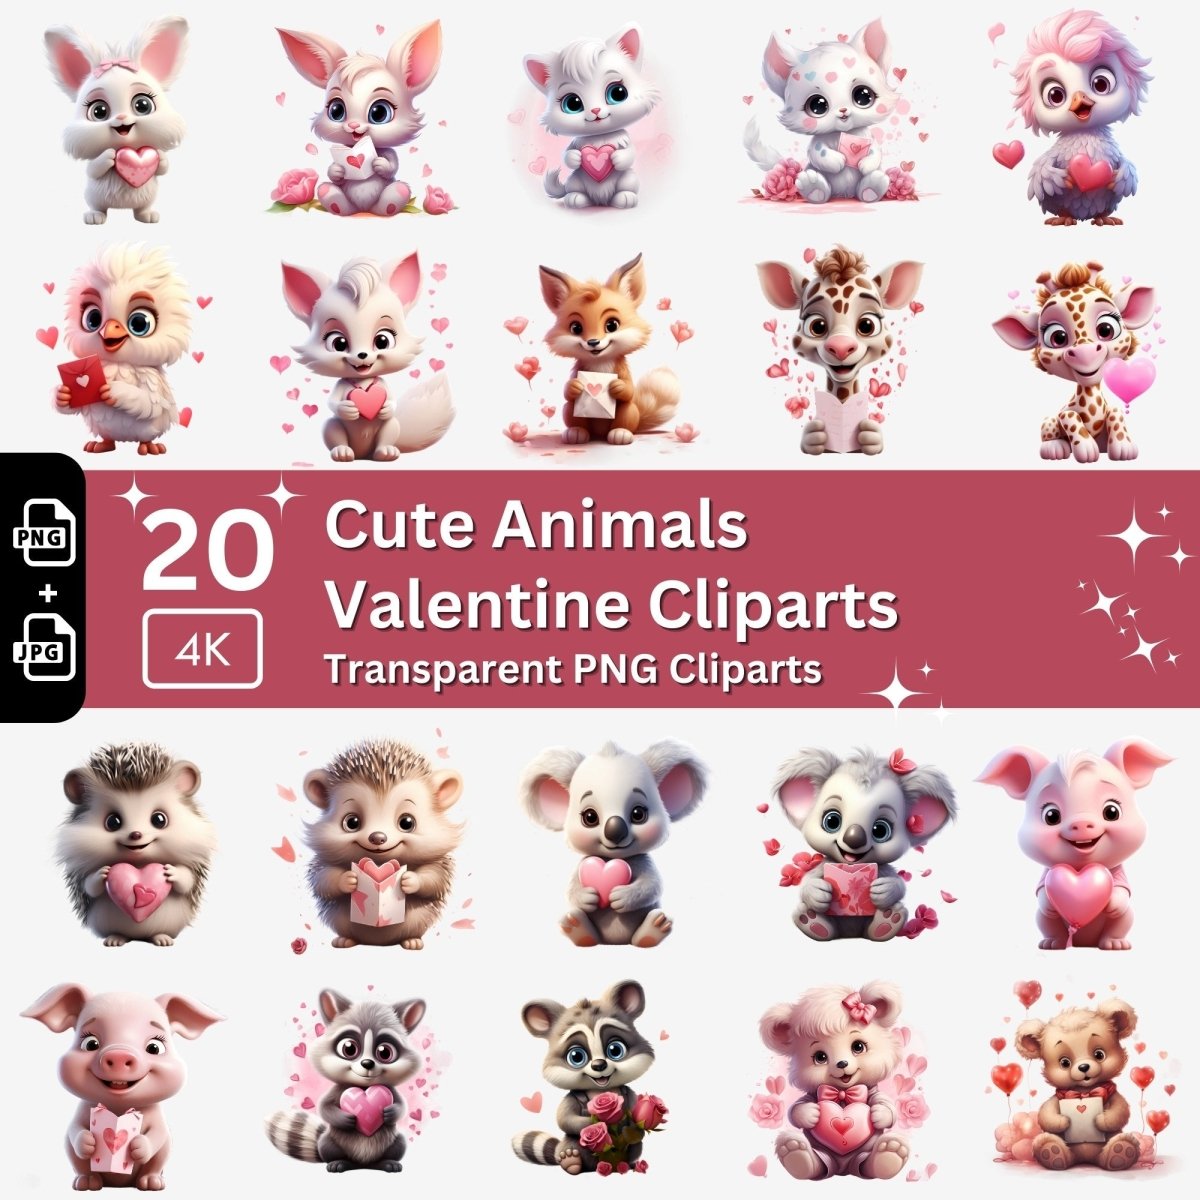 Valentines Animals Cliparts 20 PNG Bundle Romantic Animal Graphic Valentines Day Set Card Crafting Junk Journal Kit Cute Love Images - Everything Pixel